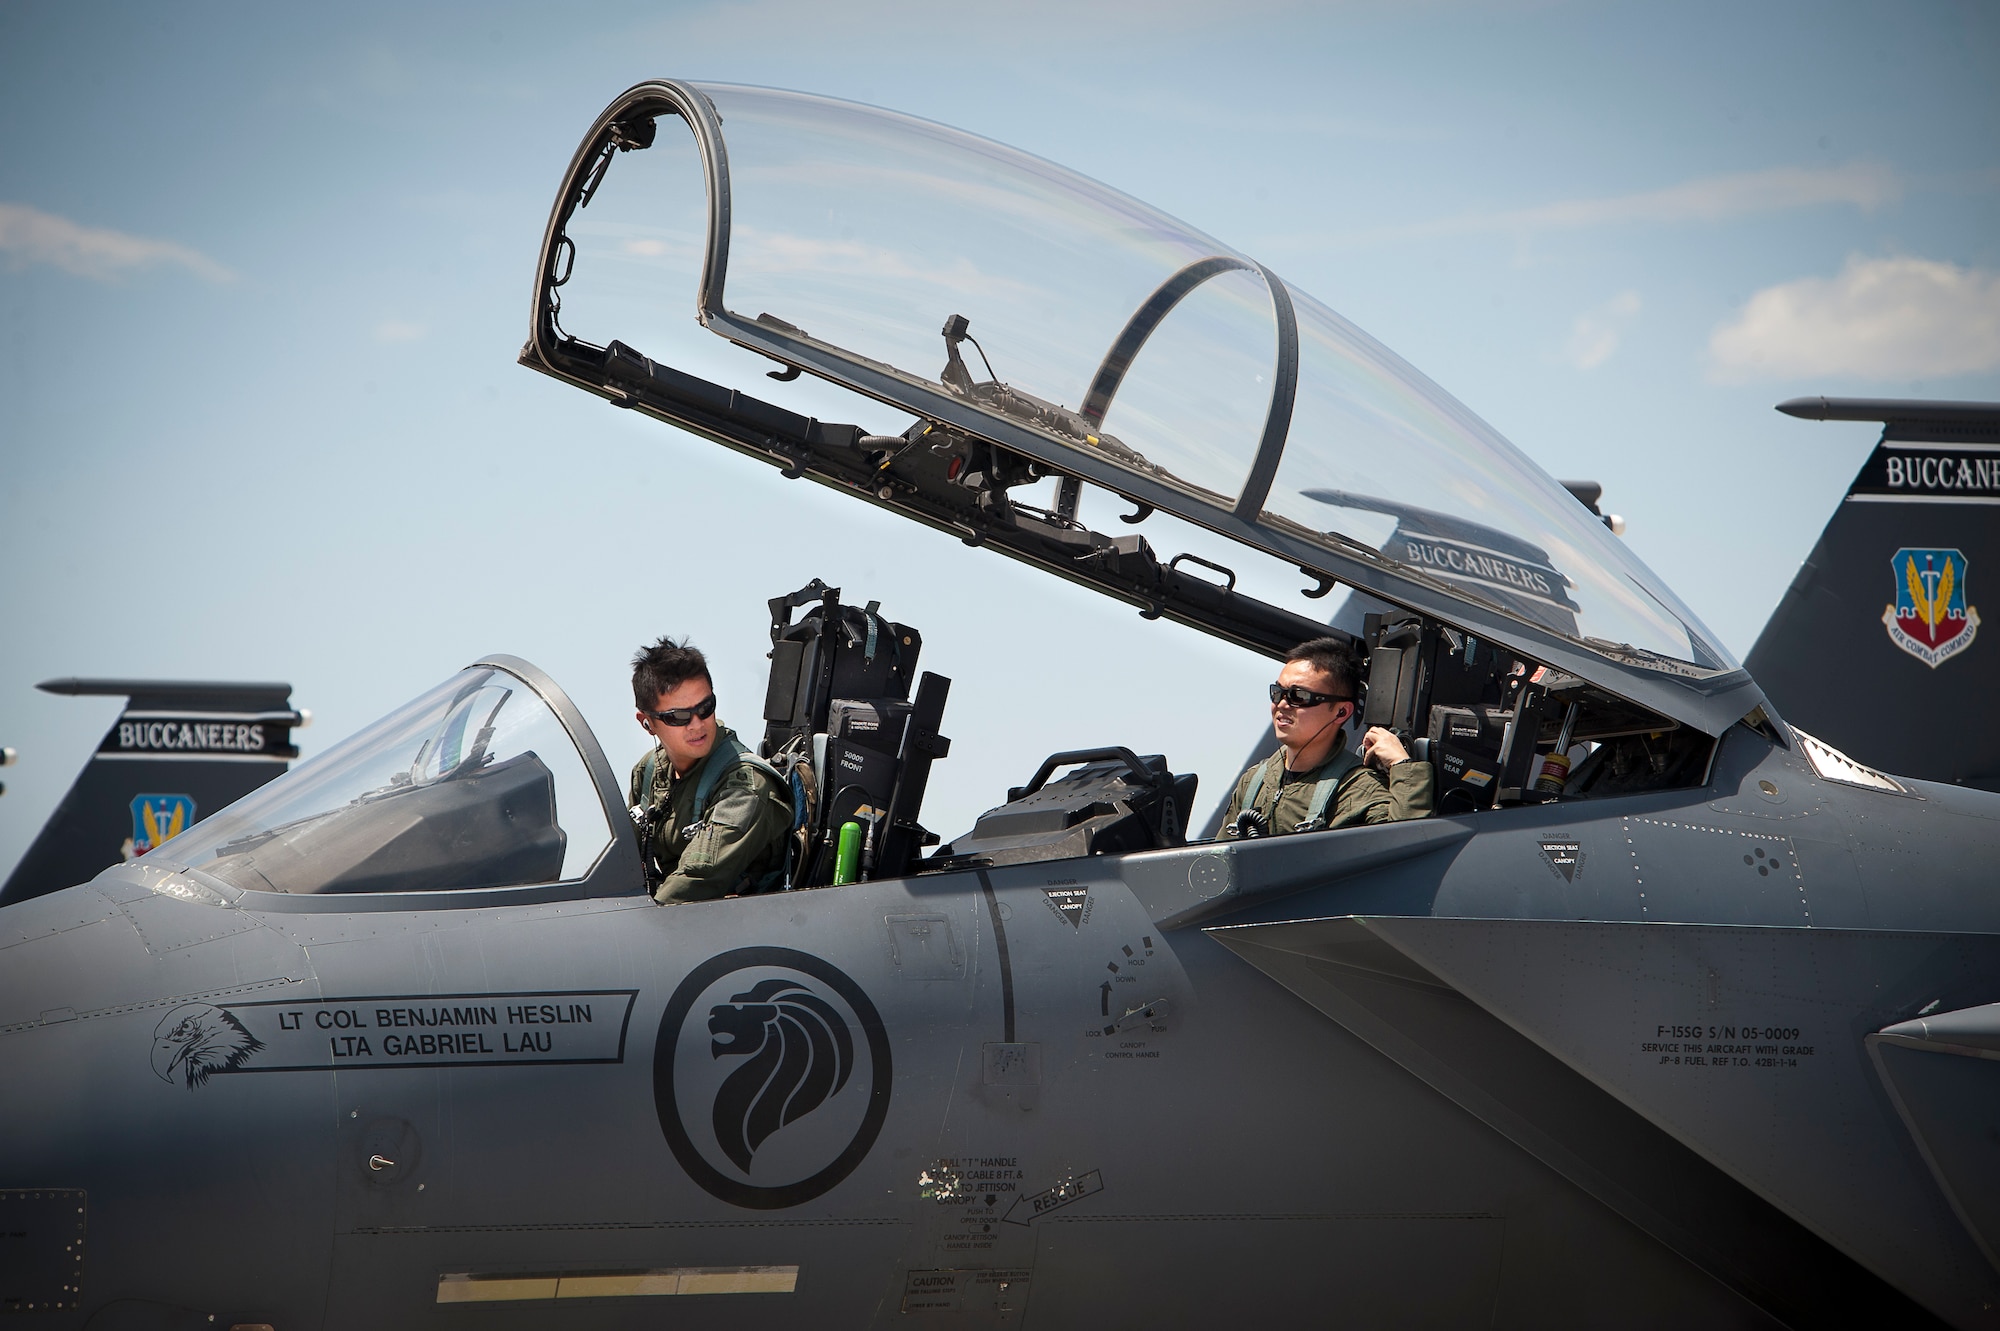 Republic of Singapore air force pilot and weapons officer assigned to the 366th Fighter Wing, 428th Fighter Squadron, Mountain Home Air Force Base, Idaho, perform preflight checks on an F-15SG aircraft prior to a Red Flag 14-3 training mission, July 18, 2014 at Nellis AFB, Nev. The RSAF’s participation in Red Flag builds international air force cooperation, interoperability, and mutual support. (U.S. Air Force photo by Lawrence Crespo)